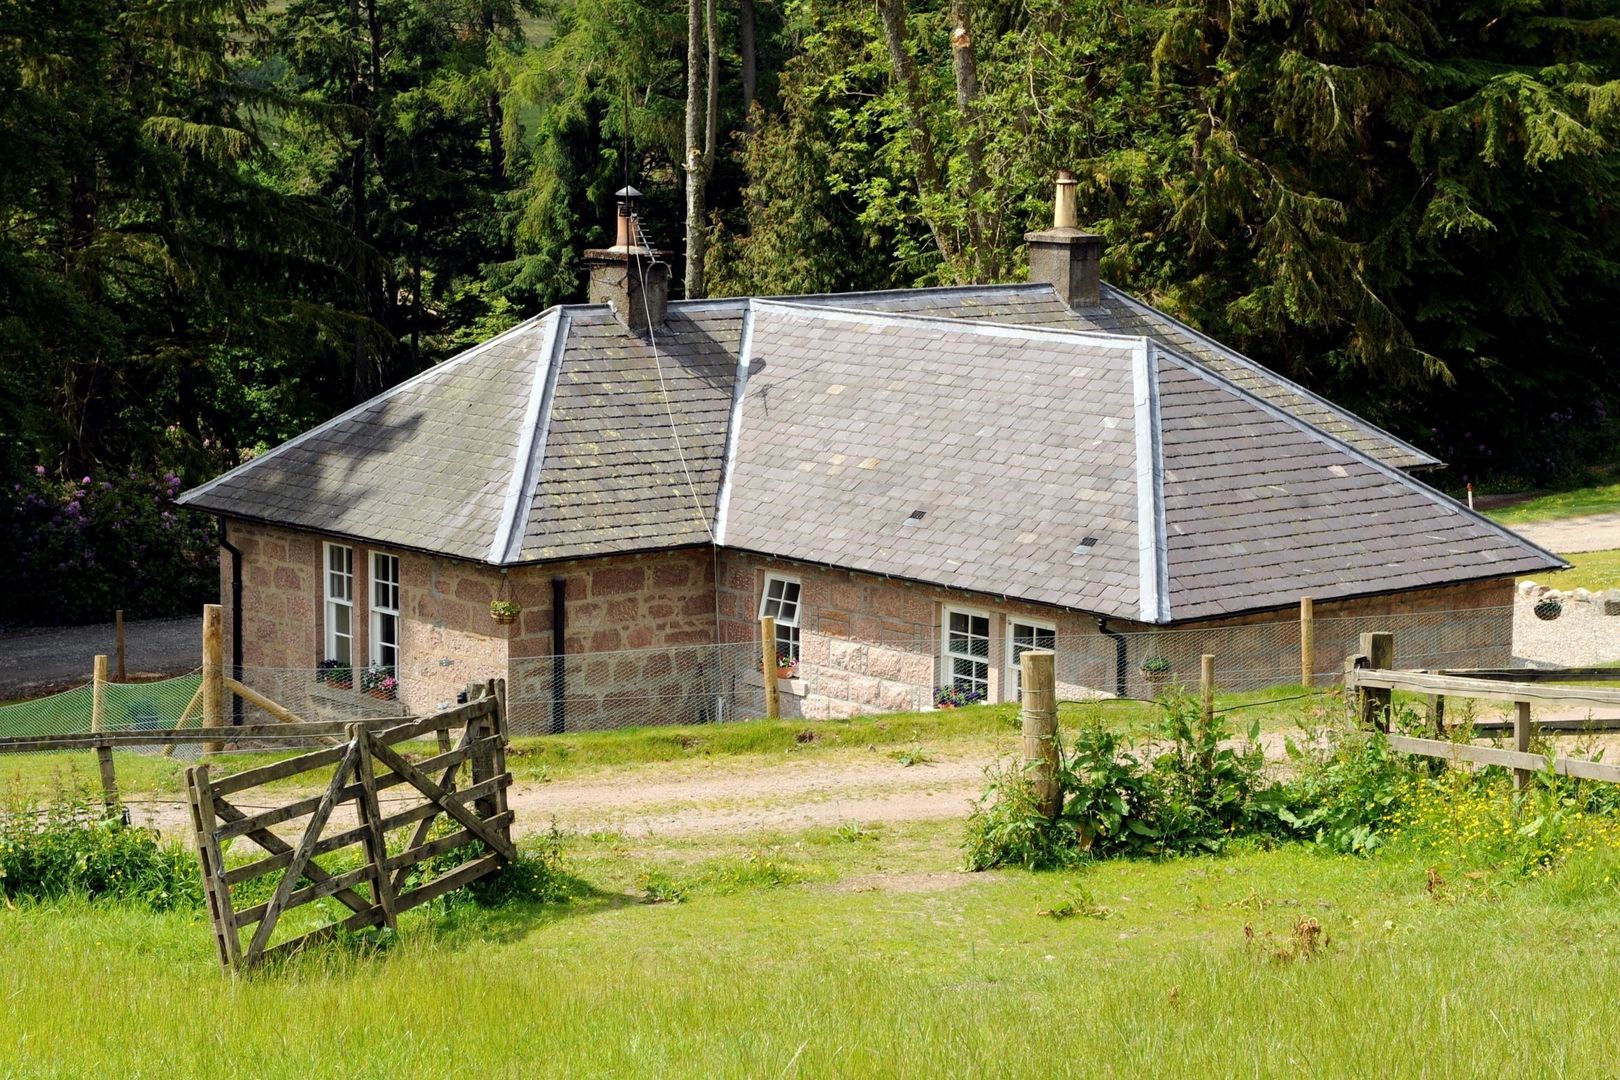 Laundry Cottage, Glen Dye, Banchory, Aberdeenshire, Roundhouse Architecture Ltd Roundhouse Architecture Ltd Country style houses